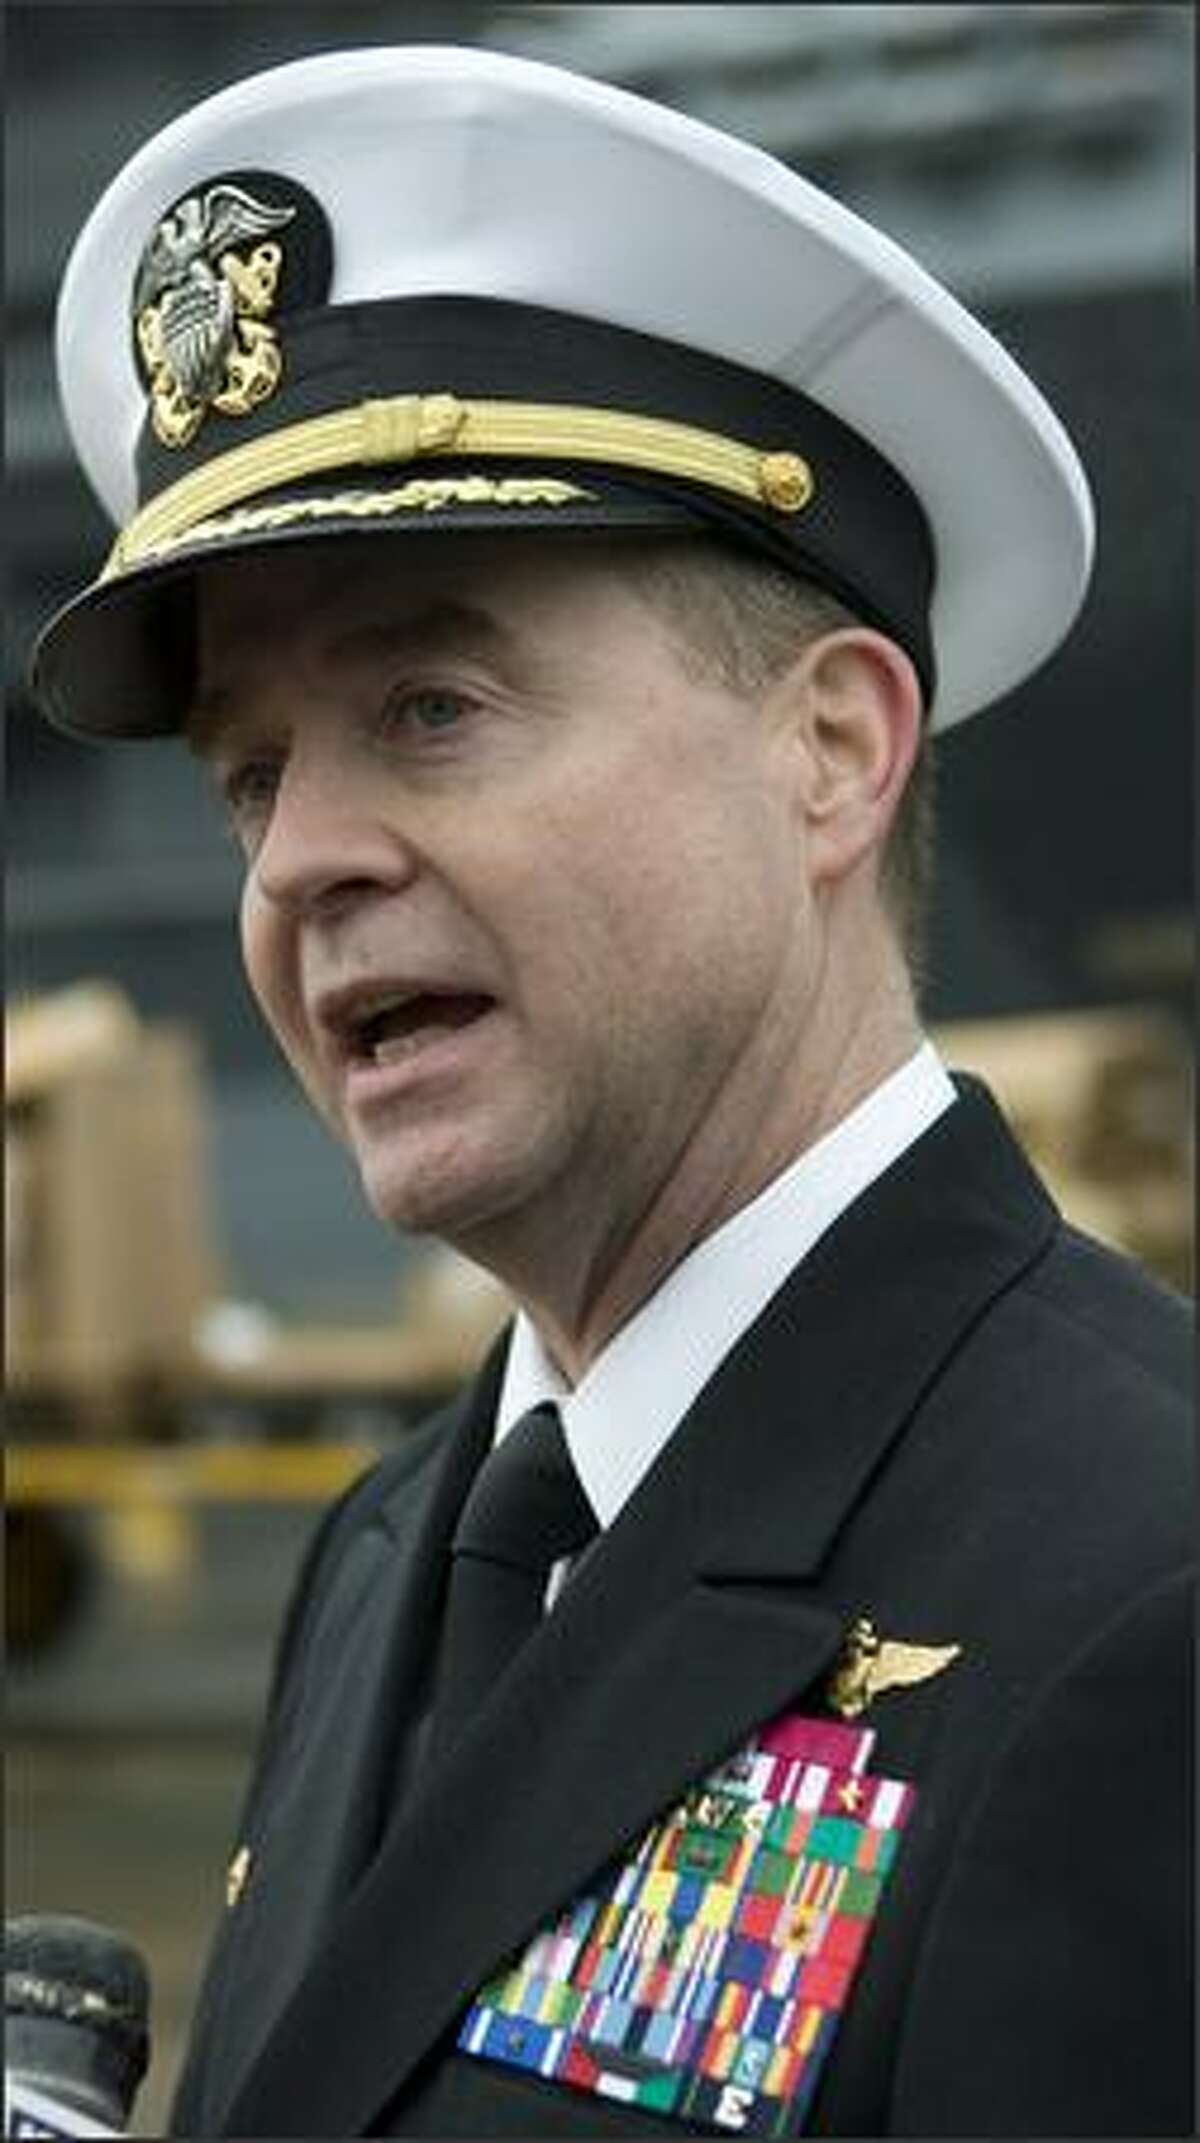 Captain Patrick D. Hall, Commanding Officer of USS Abraham Lincoln talks with members of the media just before the ship departs from Naval Station Everett in support of the global war on terrorism.